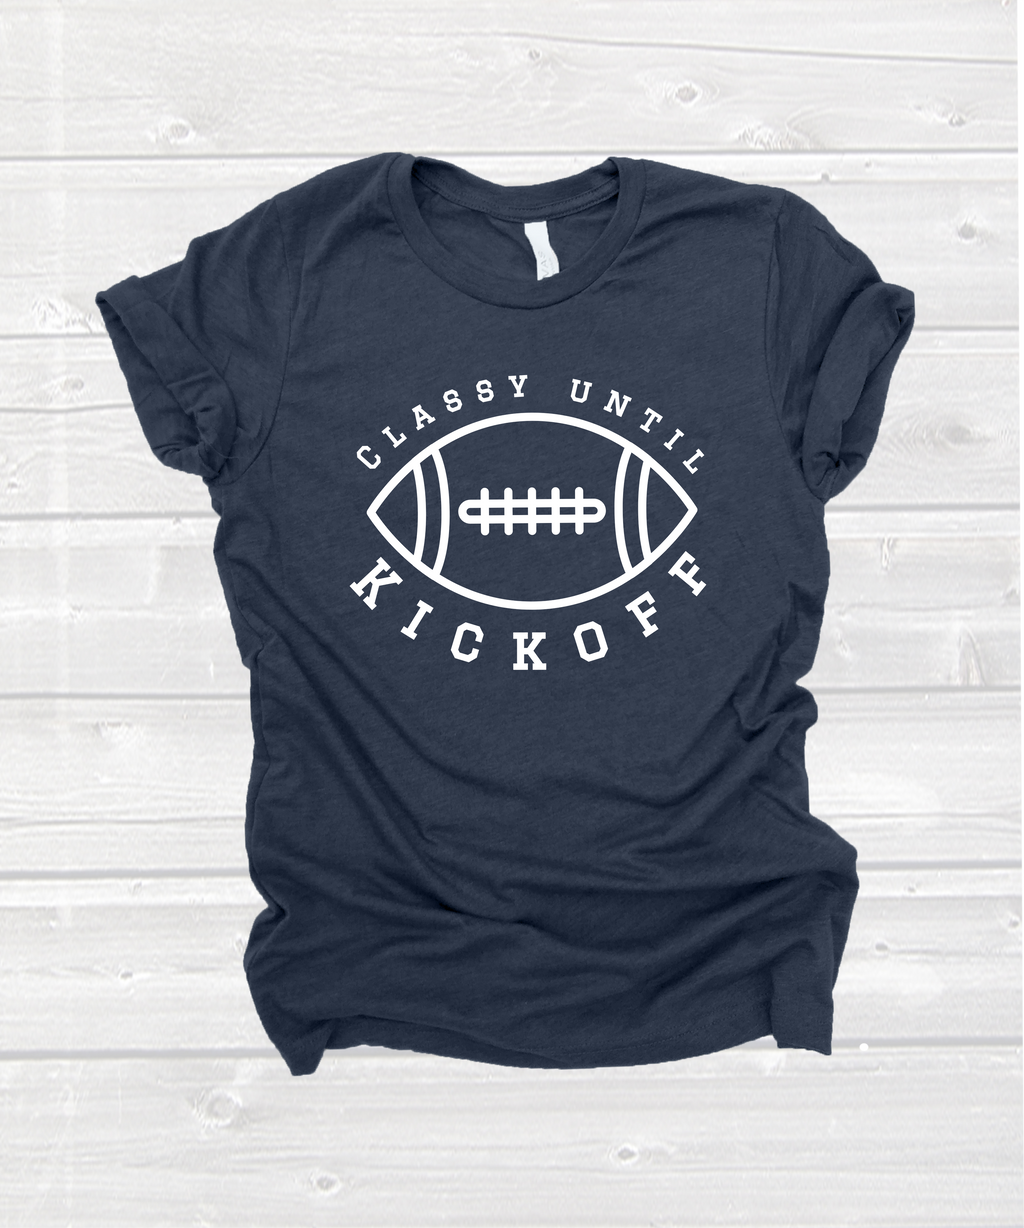 "classy until kickoff" tee in heather navy